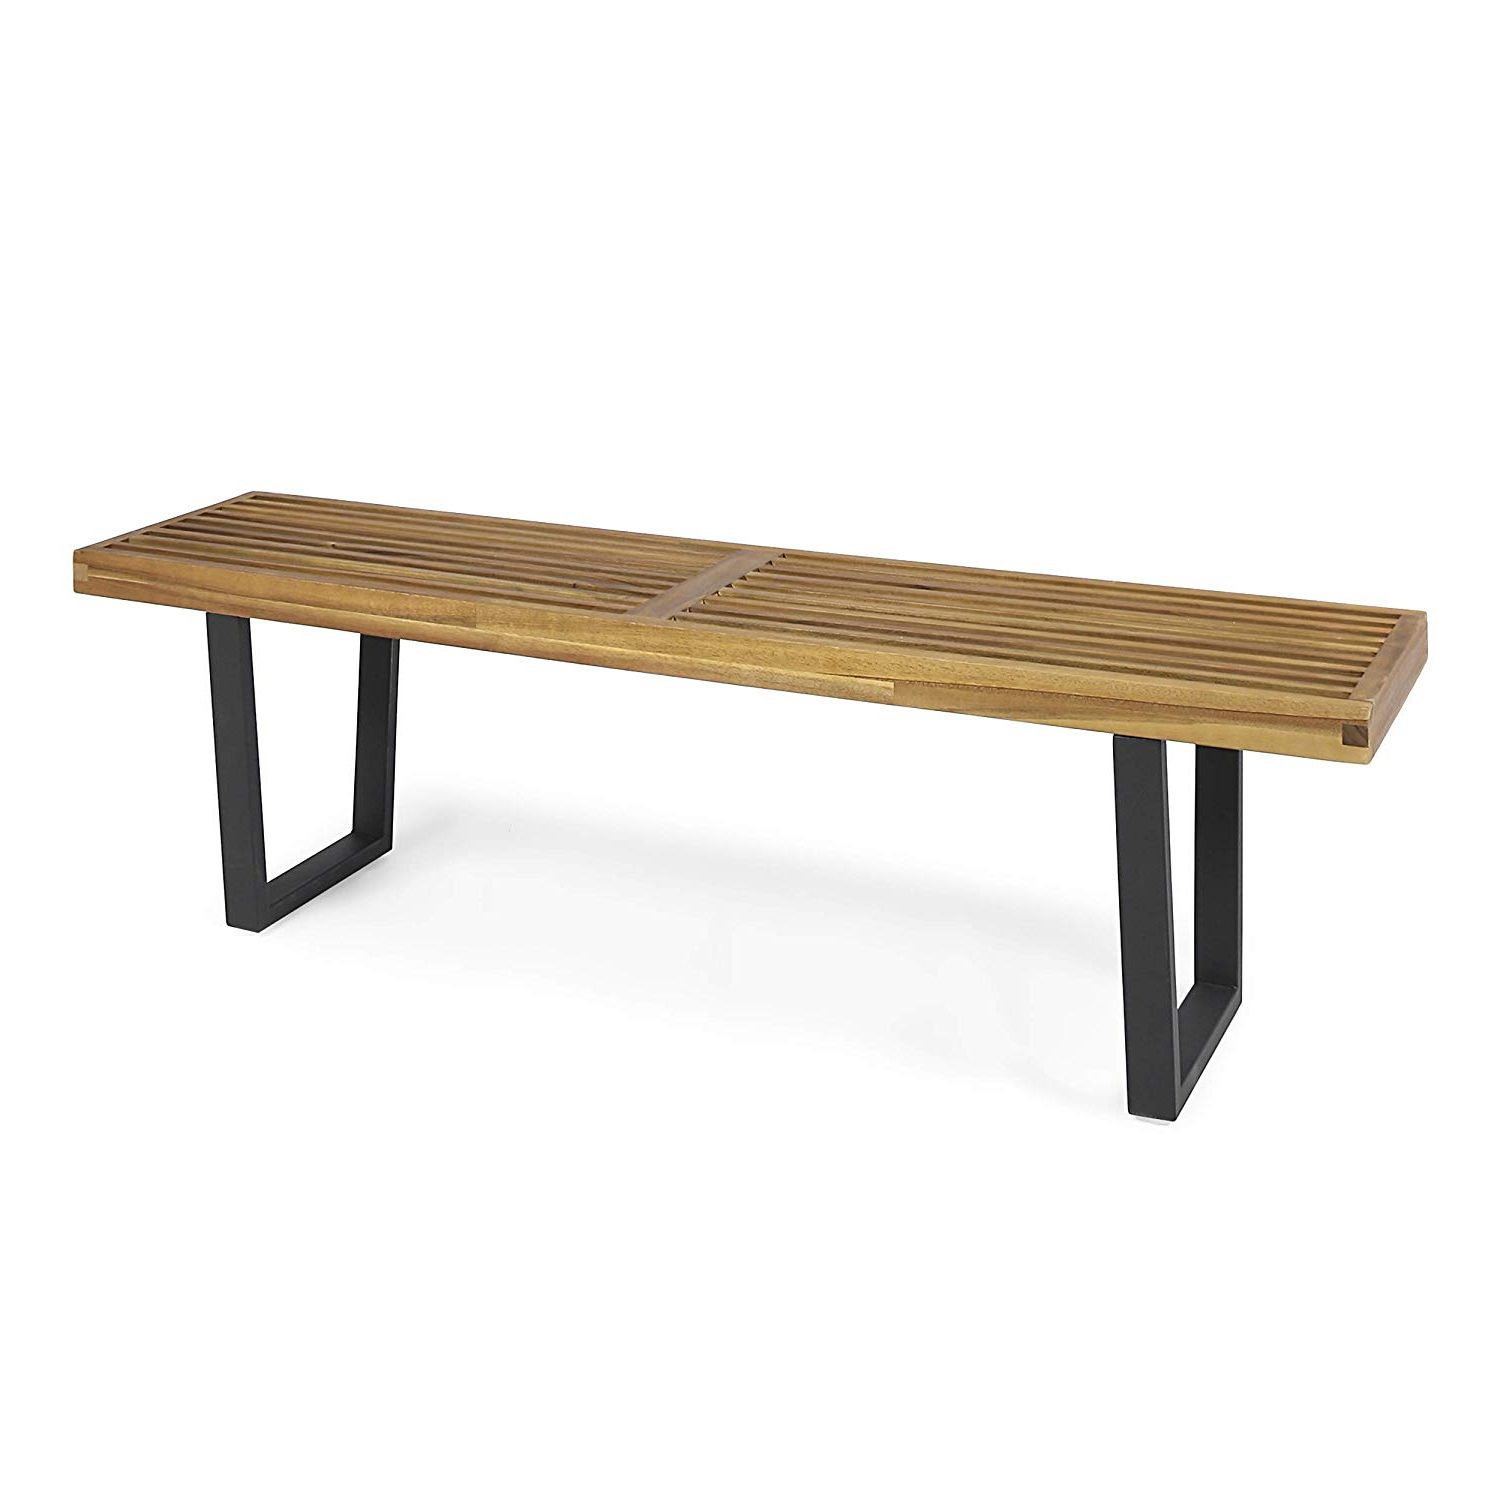 Most Recently Released Acacia Dining Tables With Black X Legs Throughout Christopher Knight Home Joa Patio Dining Bench, Acacia Wood With Iron Legs,  Modern, Contemporary, Teak Finish, Black (View 20 of 25)